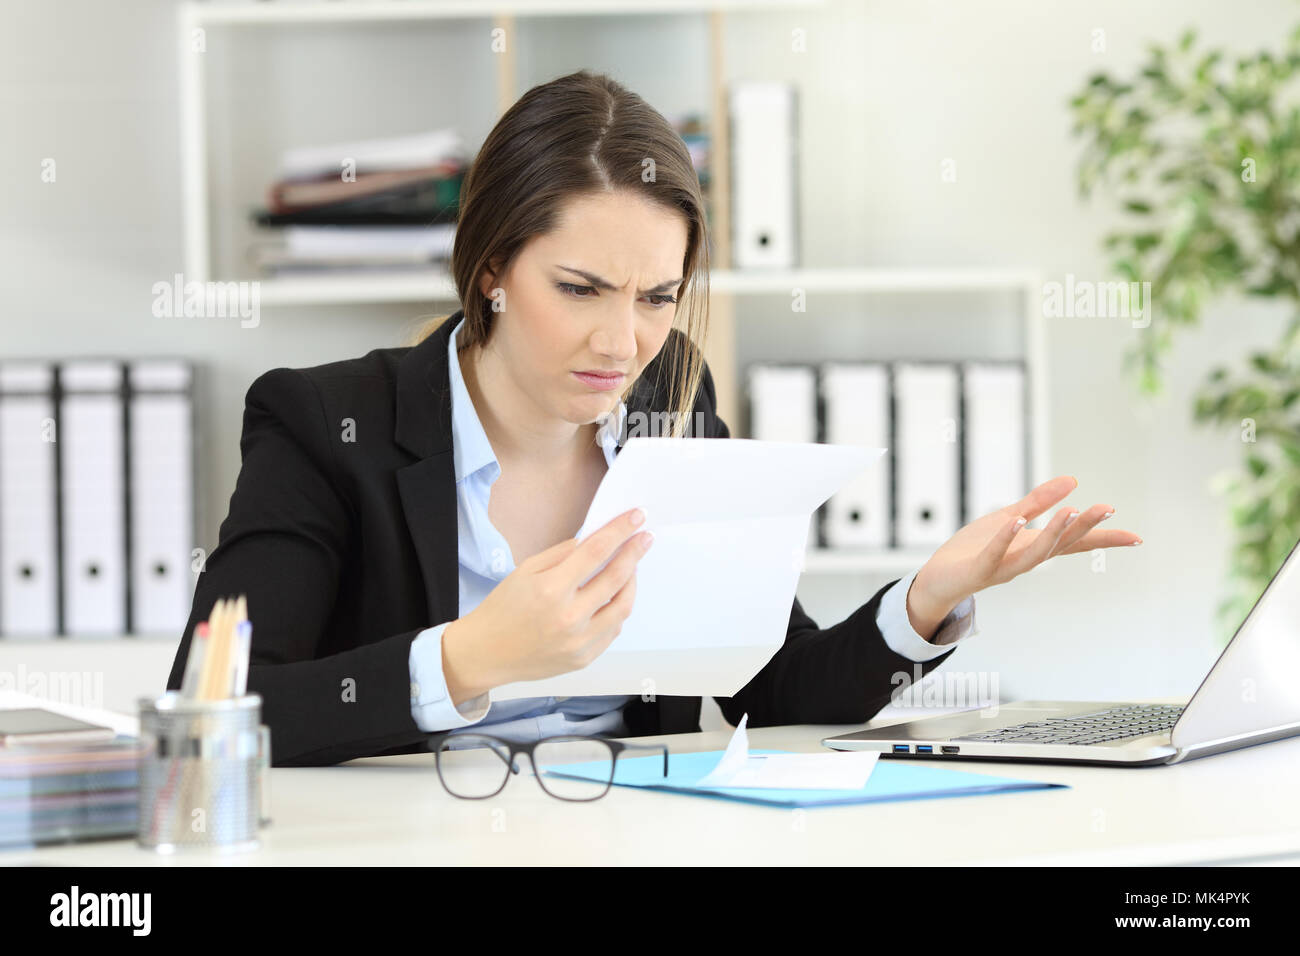 Confused office worker reading documents on a desktop Stock Photo